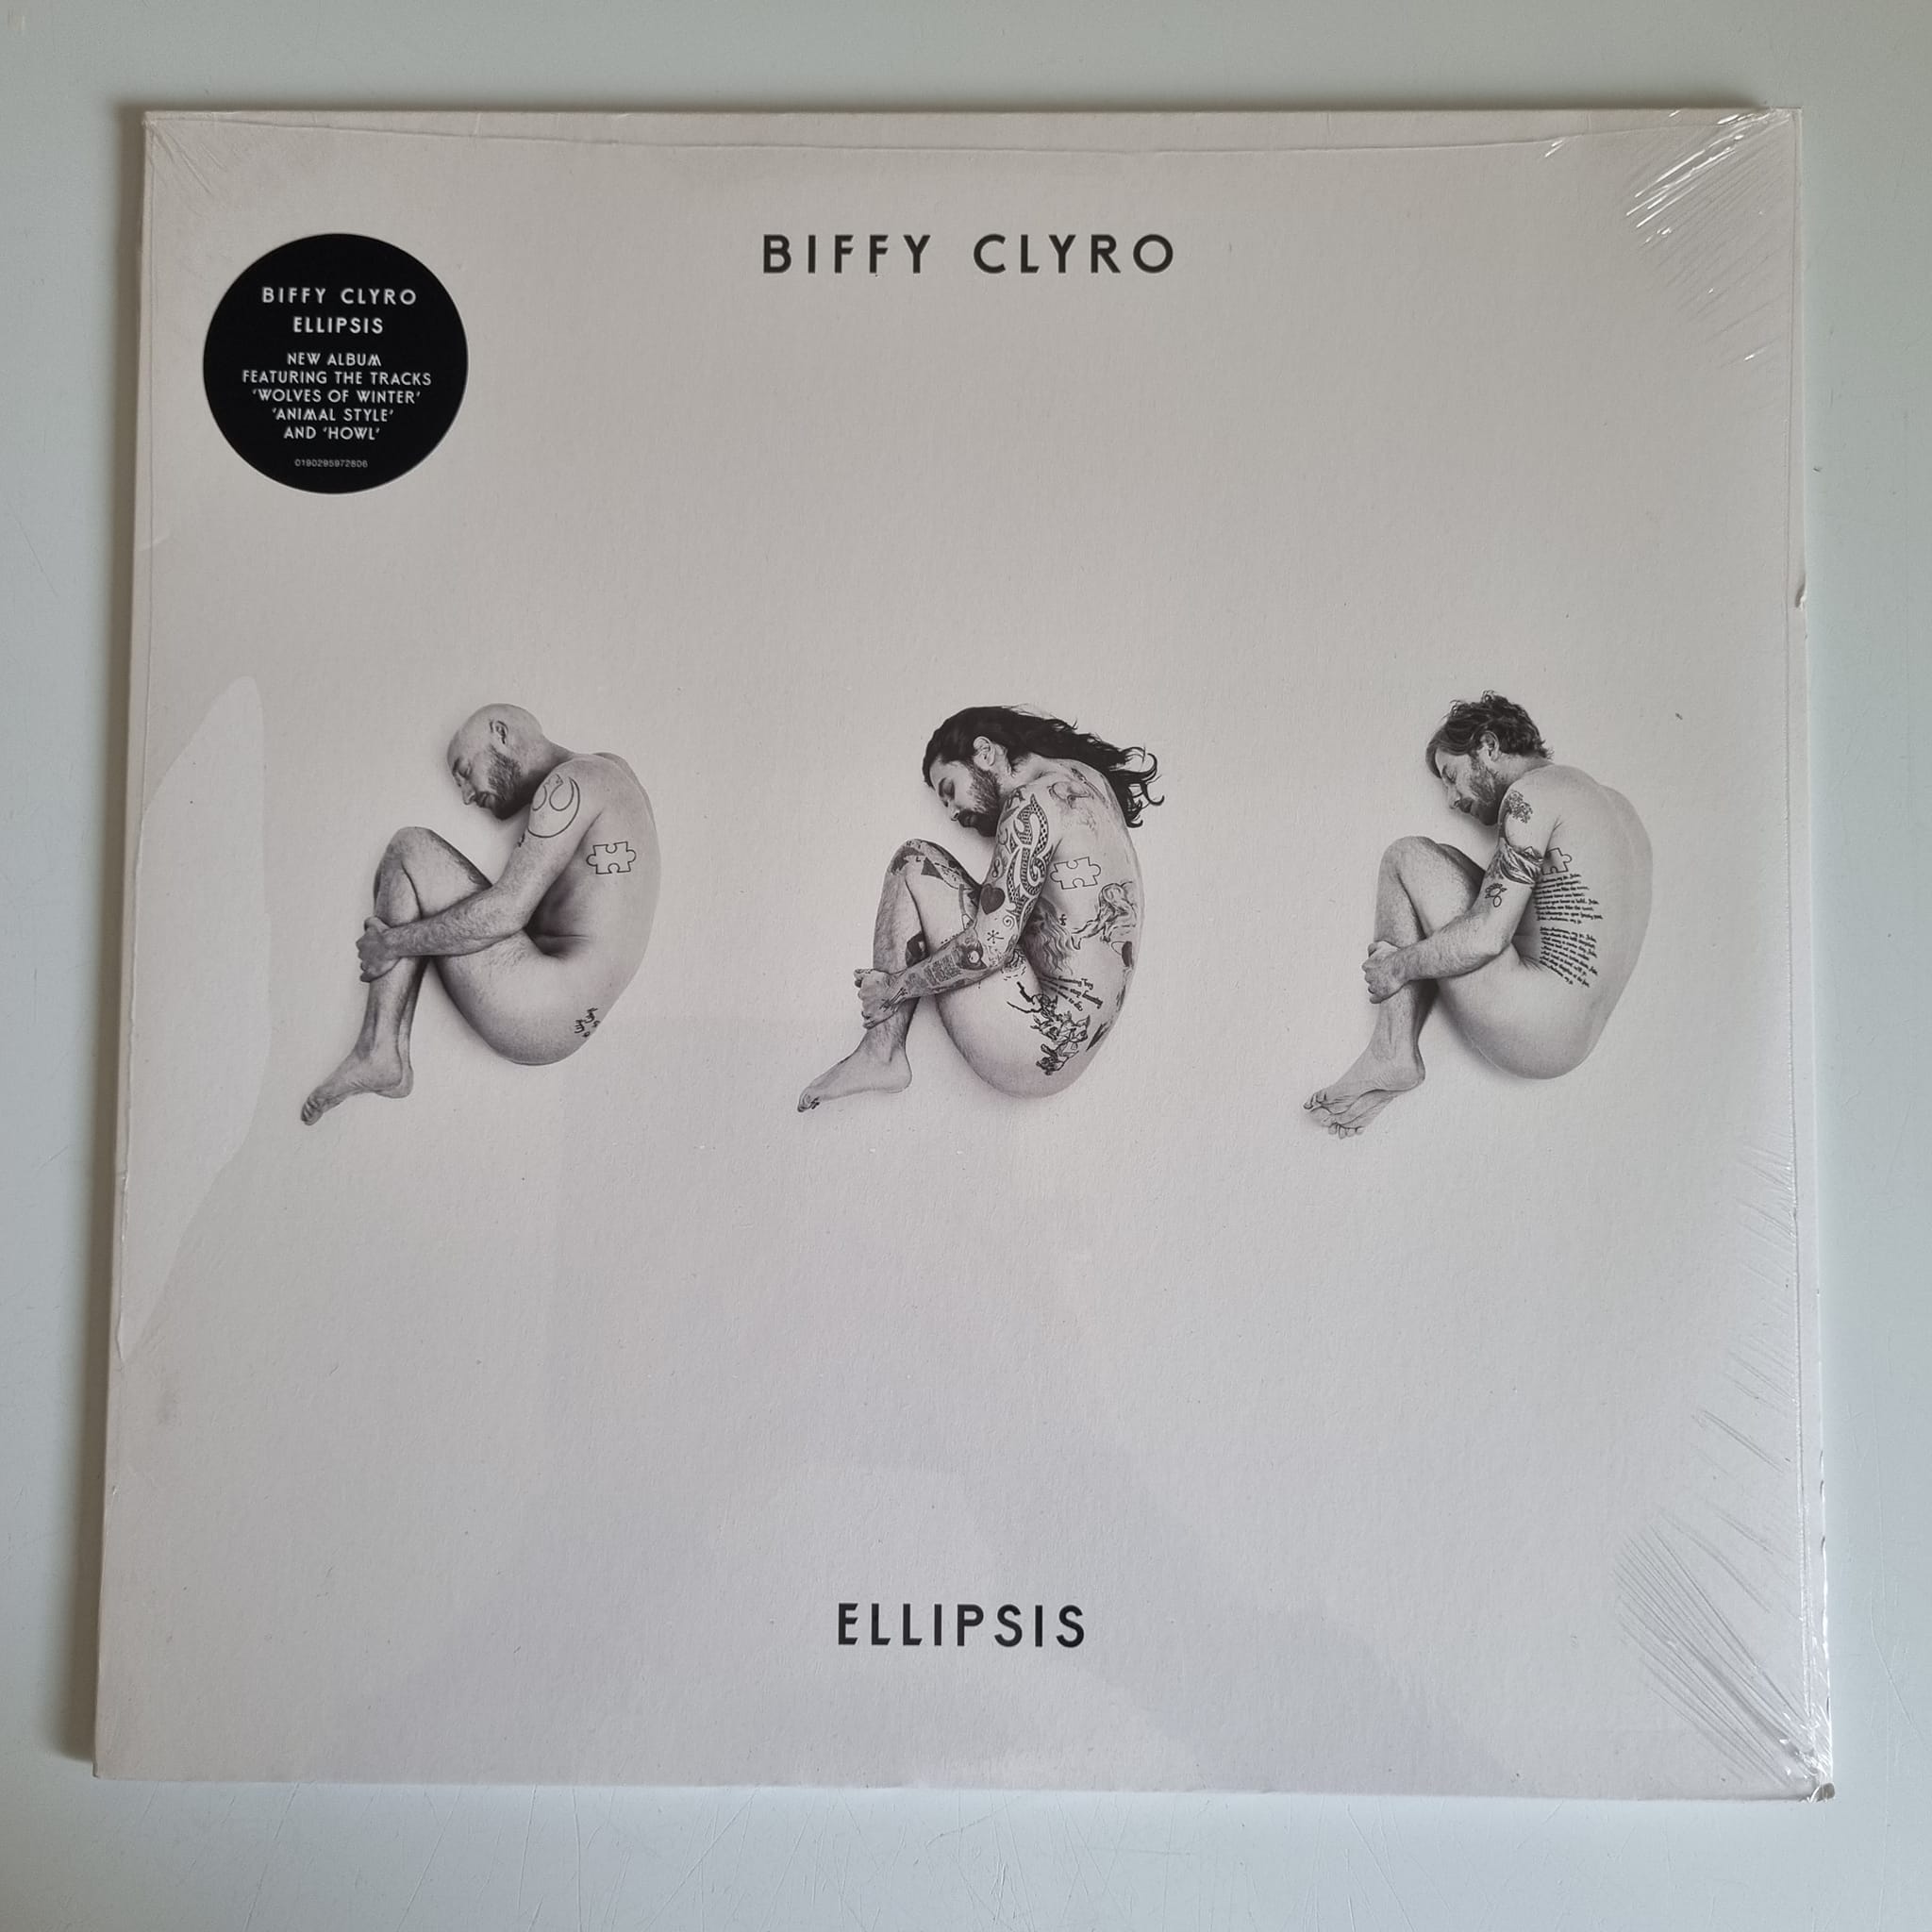 Buy this rare Biffy Clyro record by clicking here